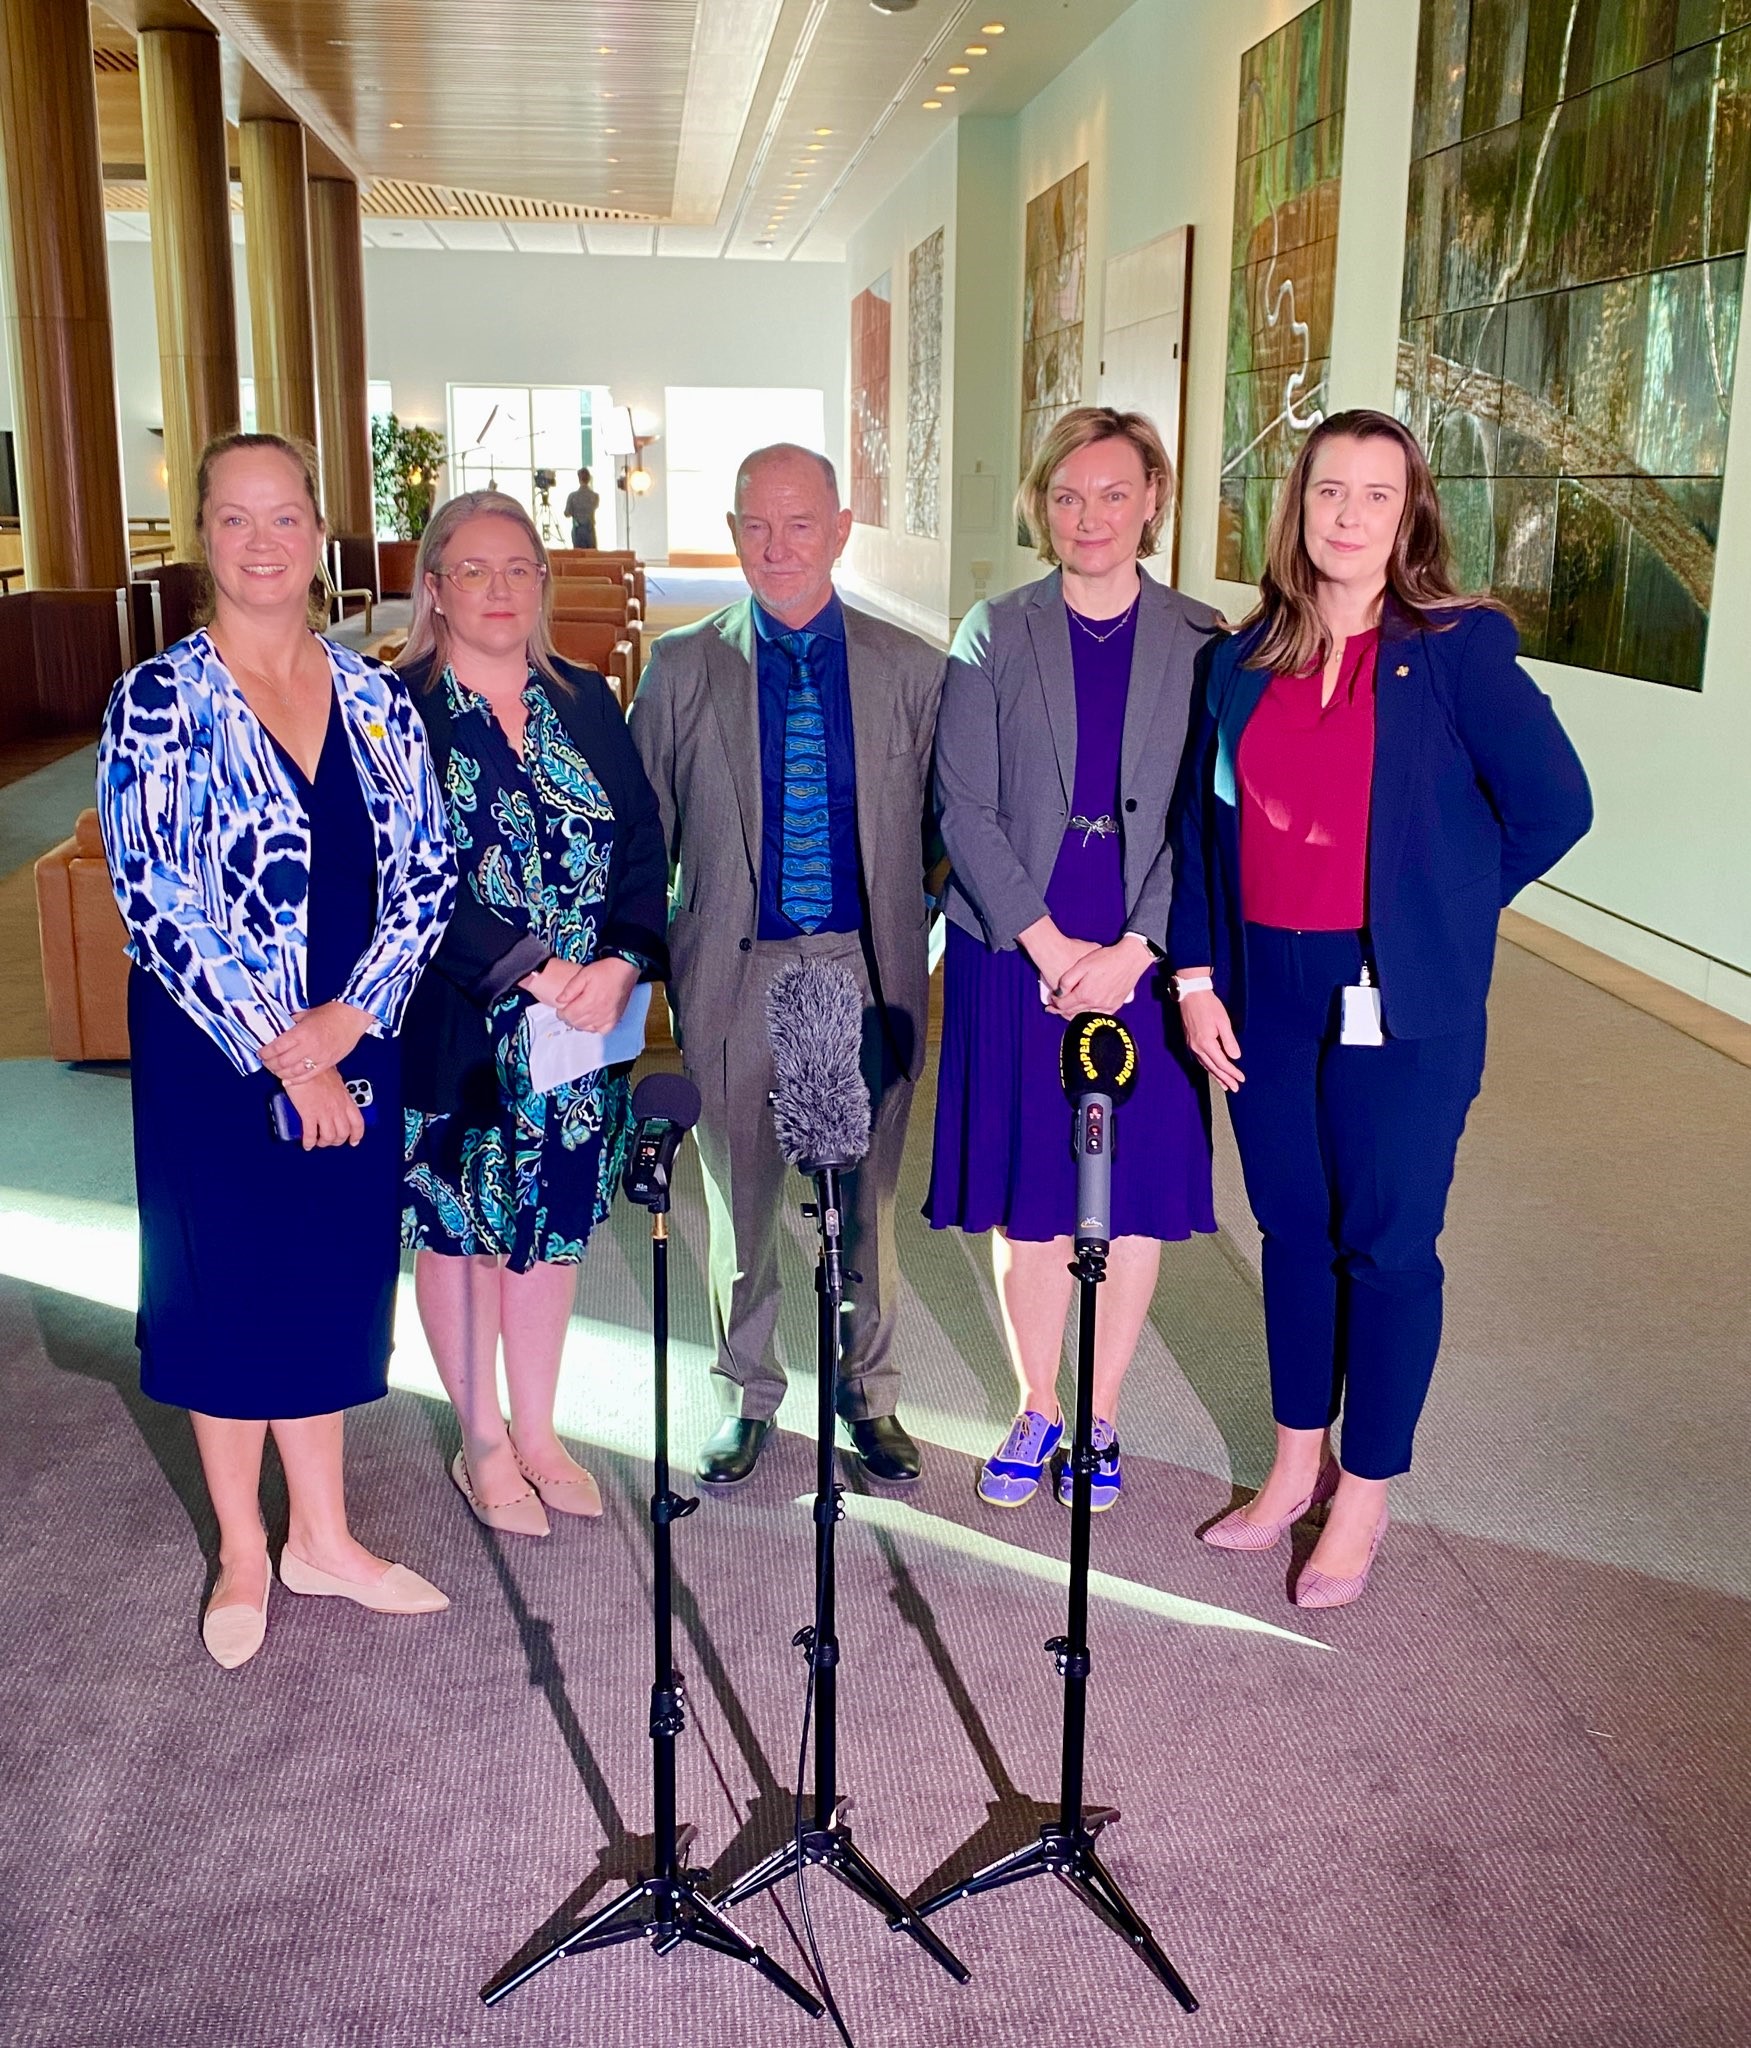 Dr Danielle McMullen with other public health leaders at a press conference in Mural Hall, Australian Parliament House